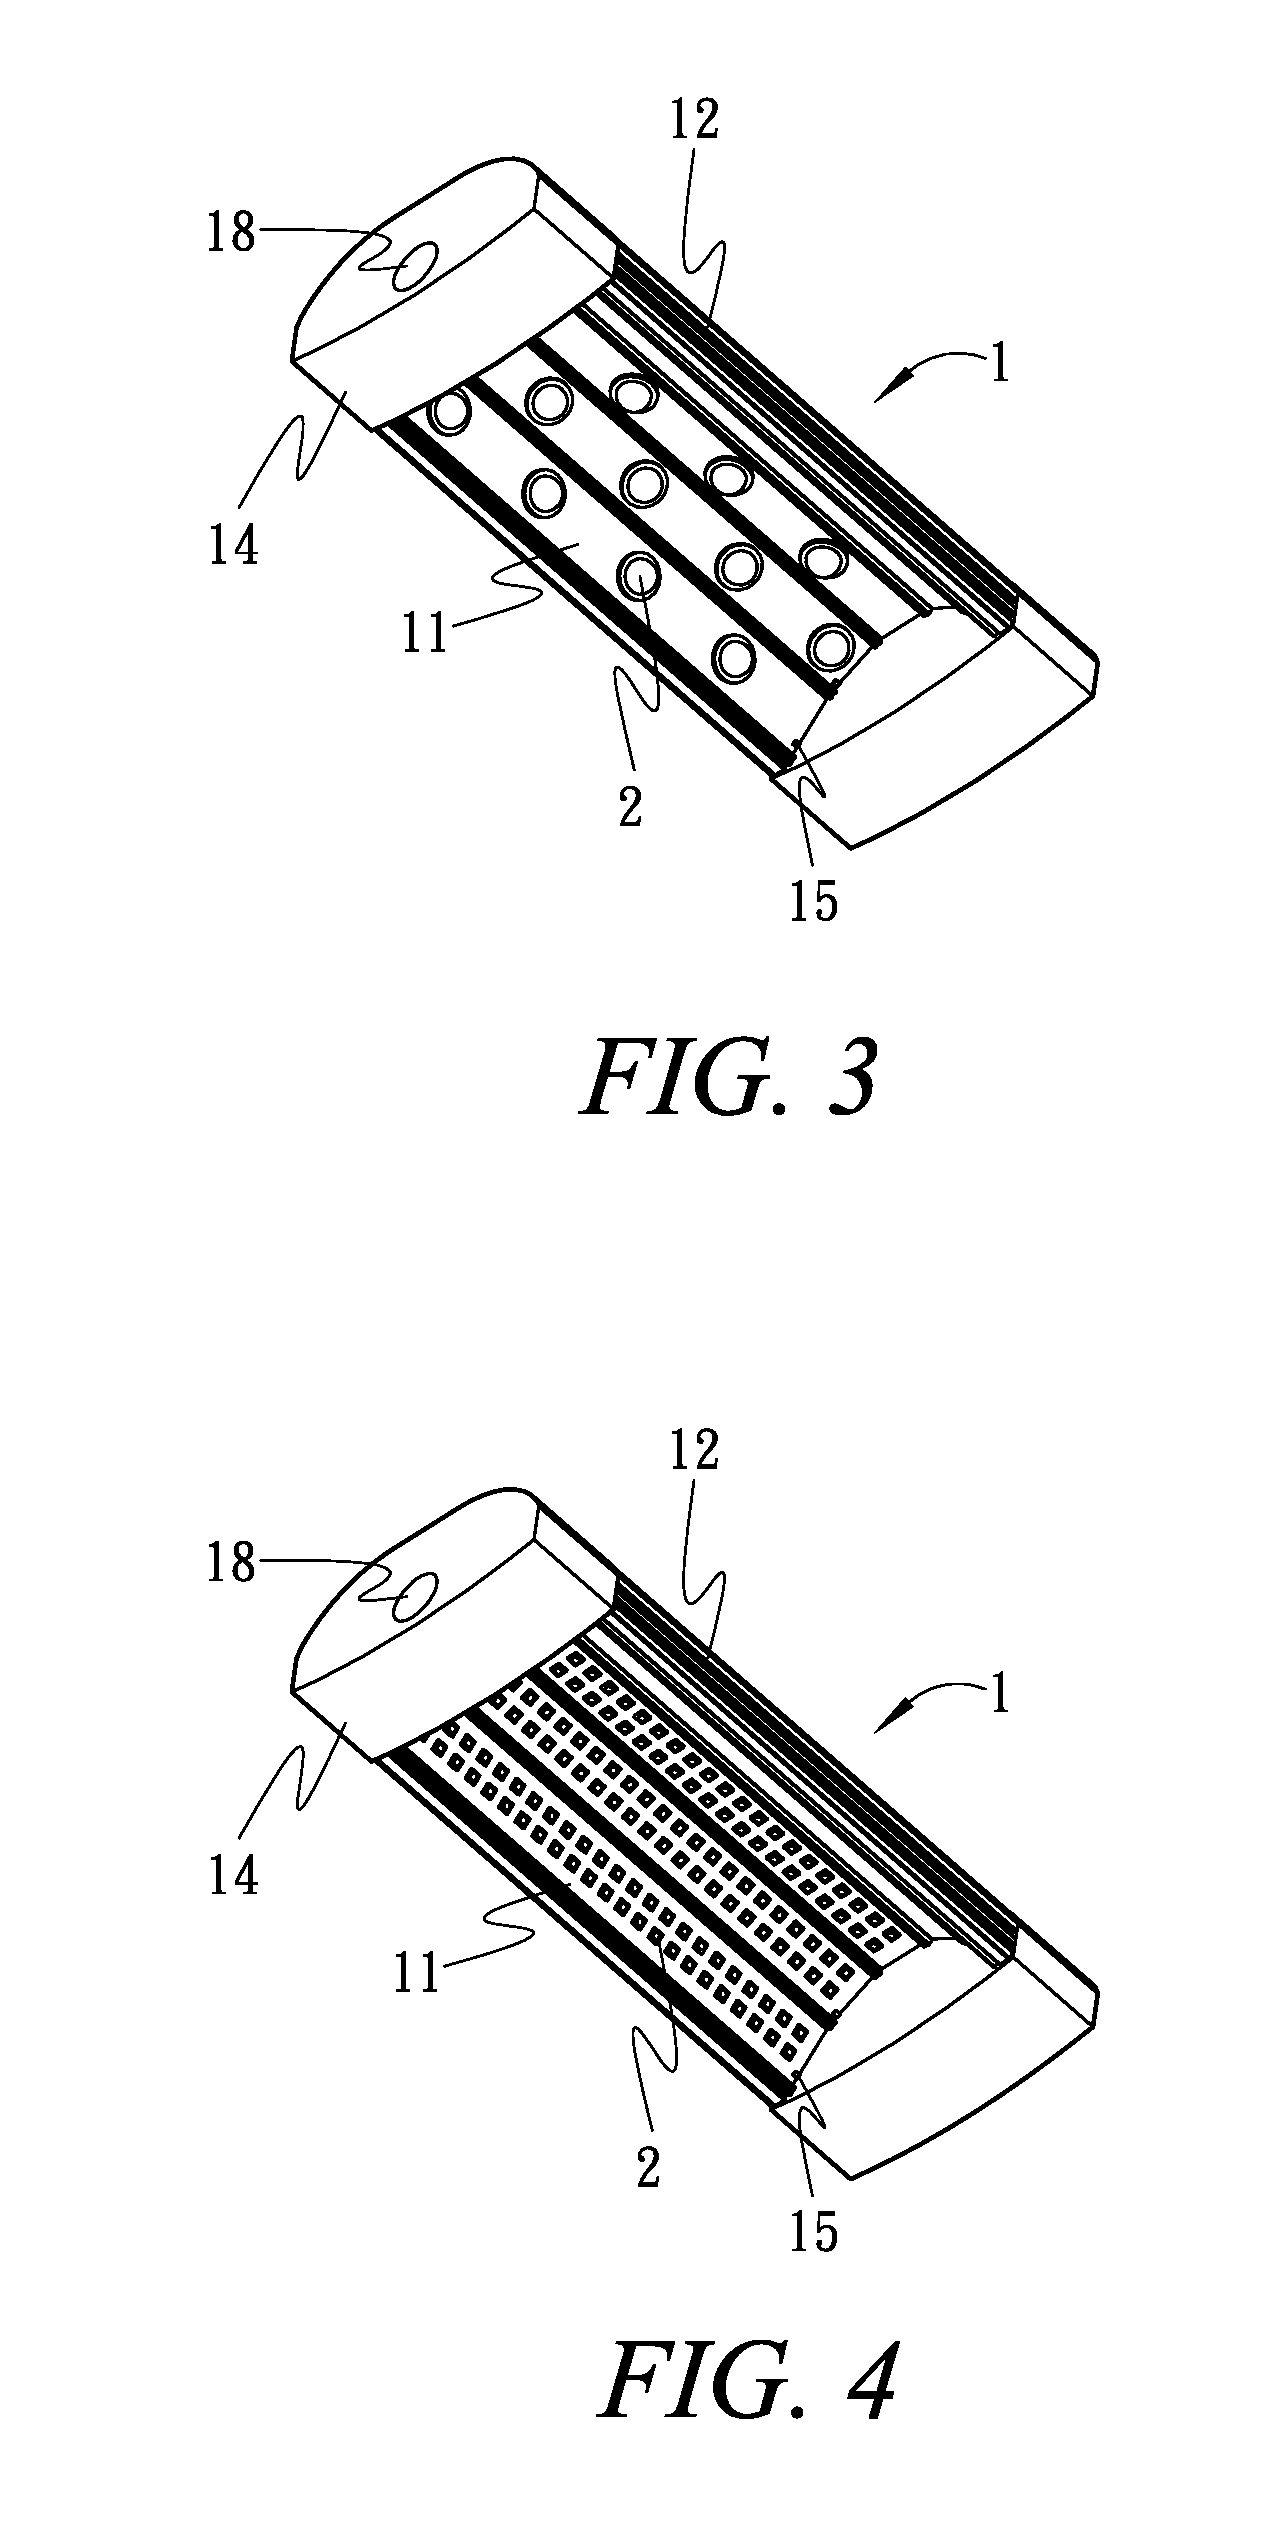 Roadside lamp with a heat dissipating design